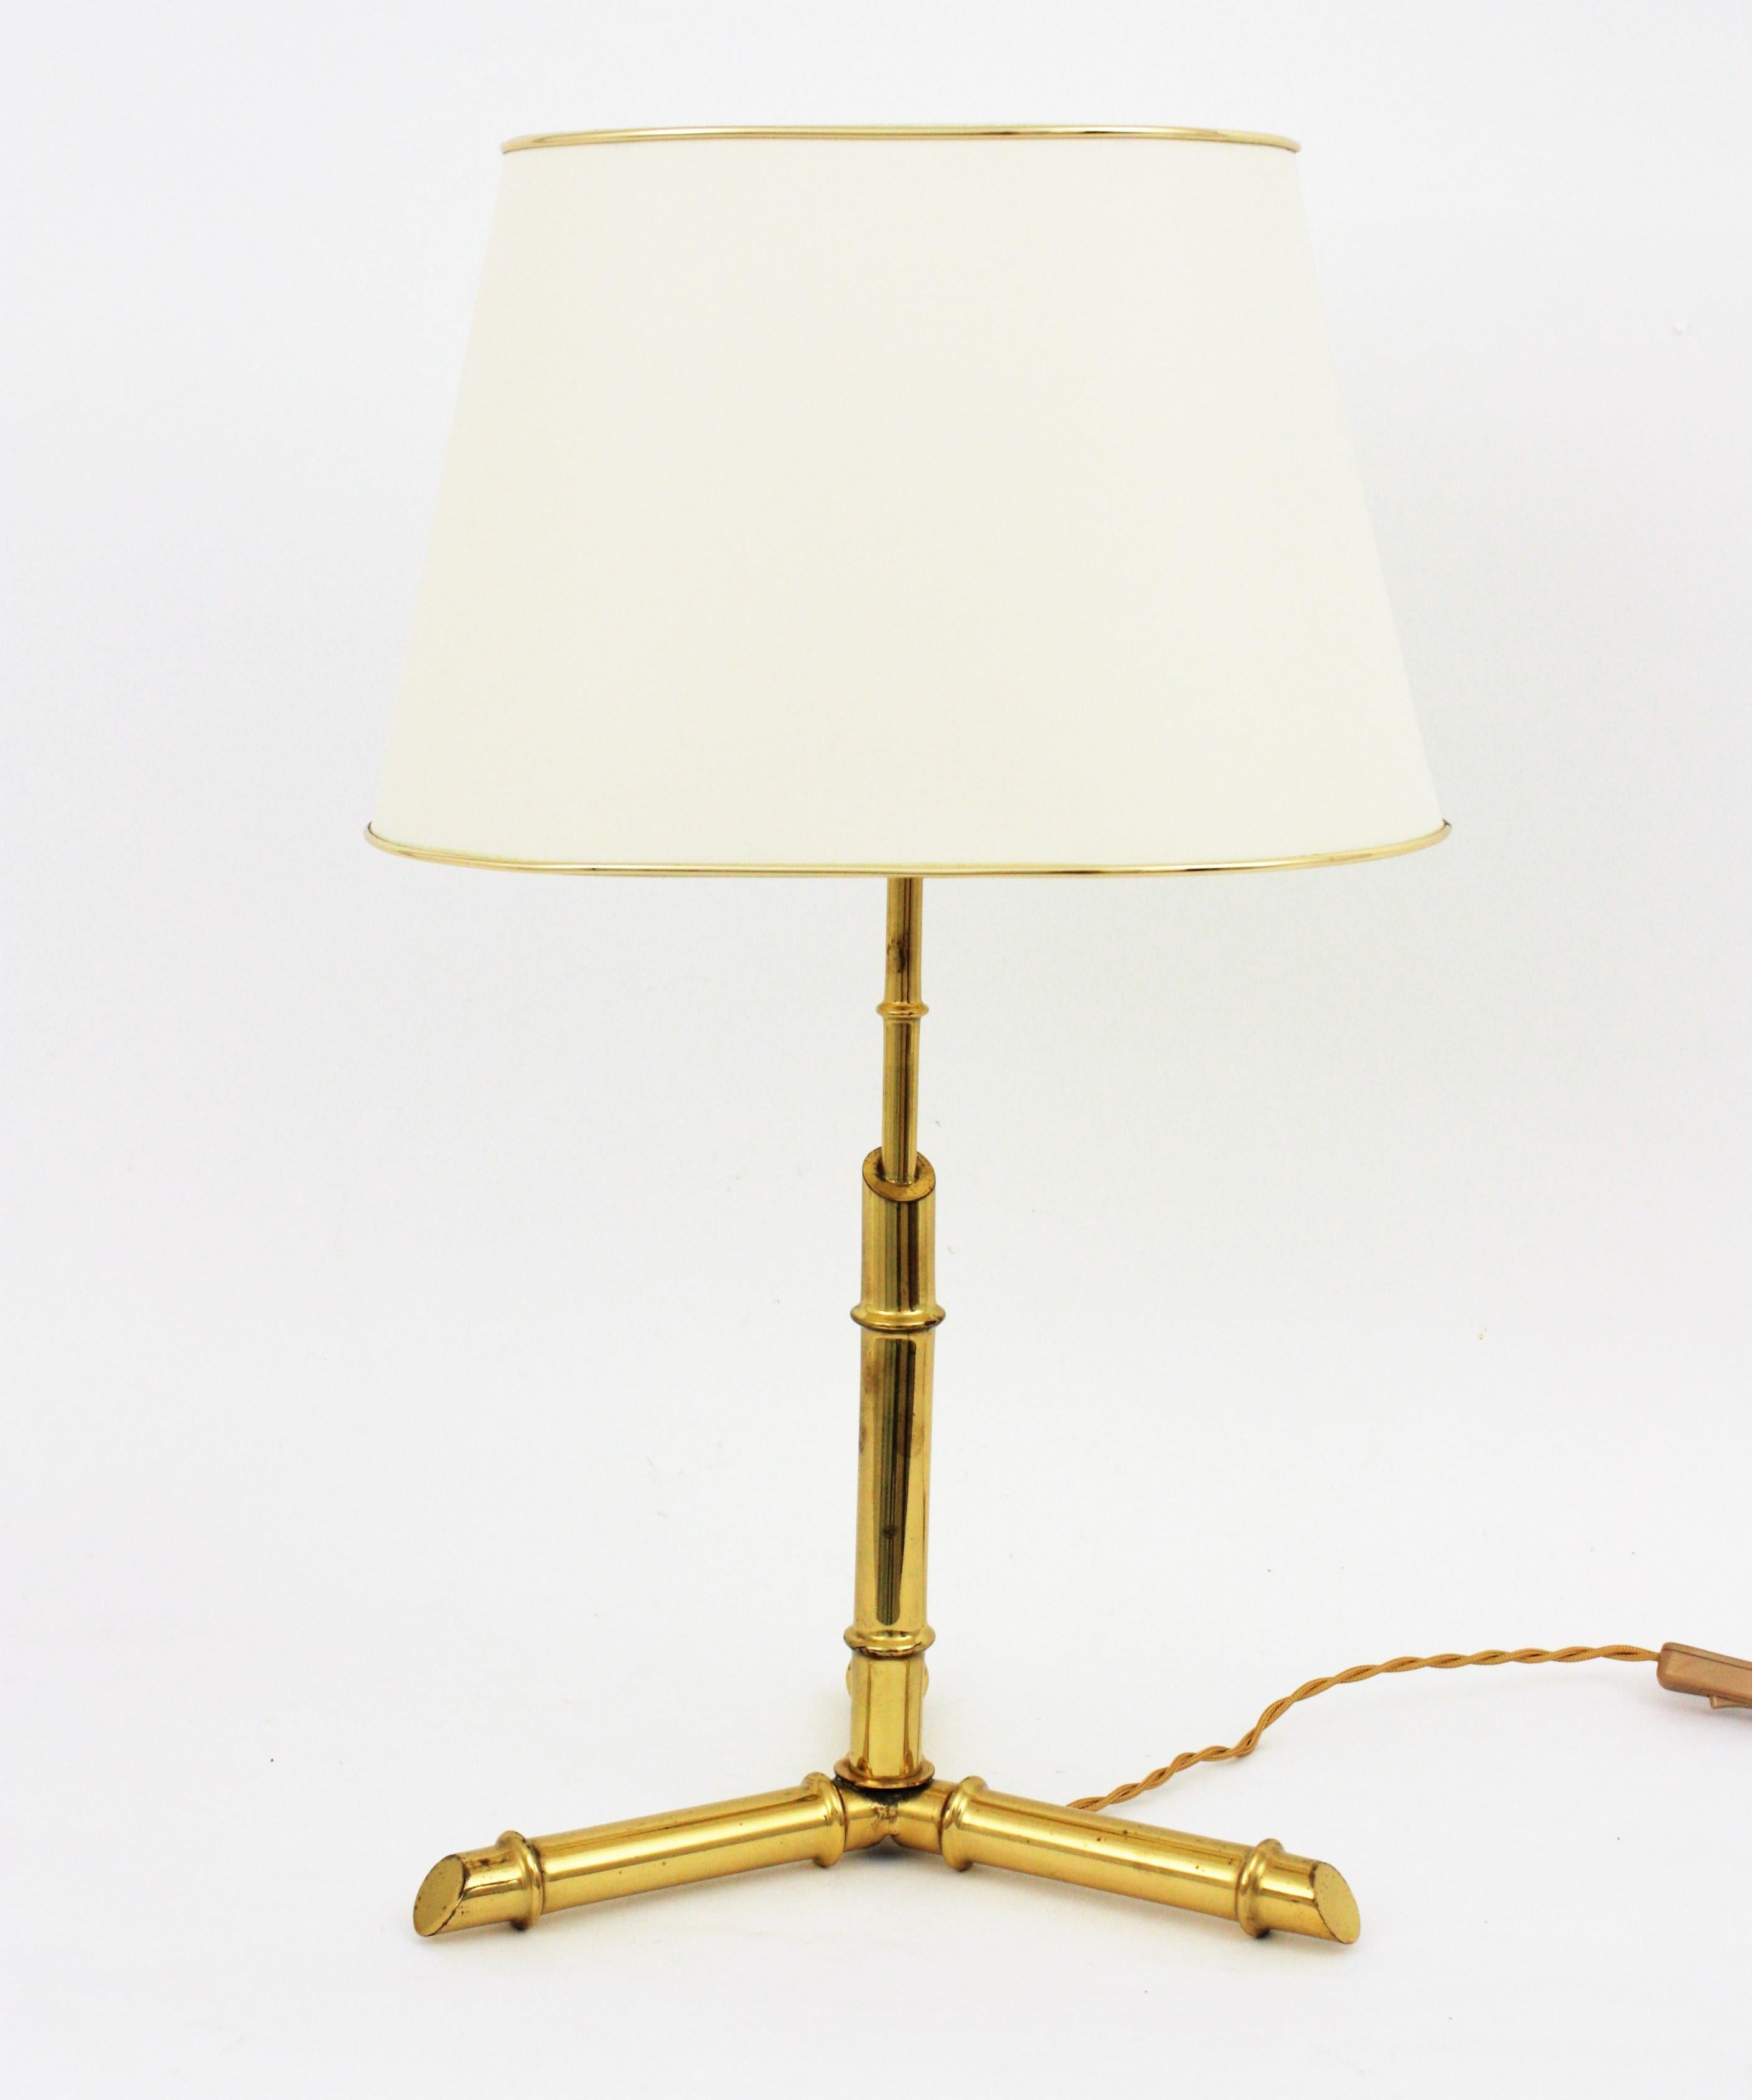 Italian Faux Bamboo Tripod Table Lamp in Brass, 1970s For Sale 4